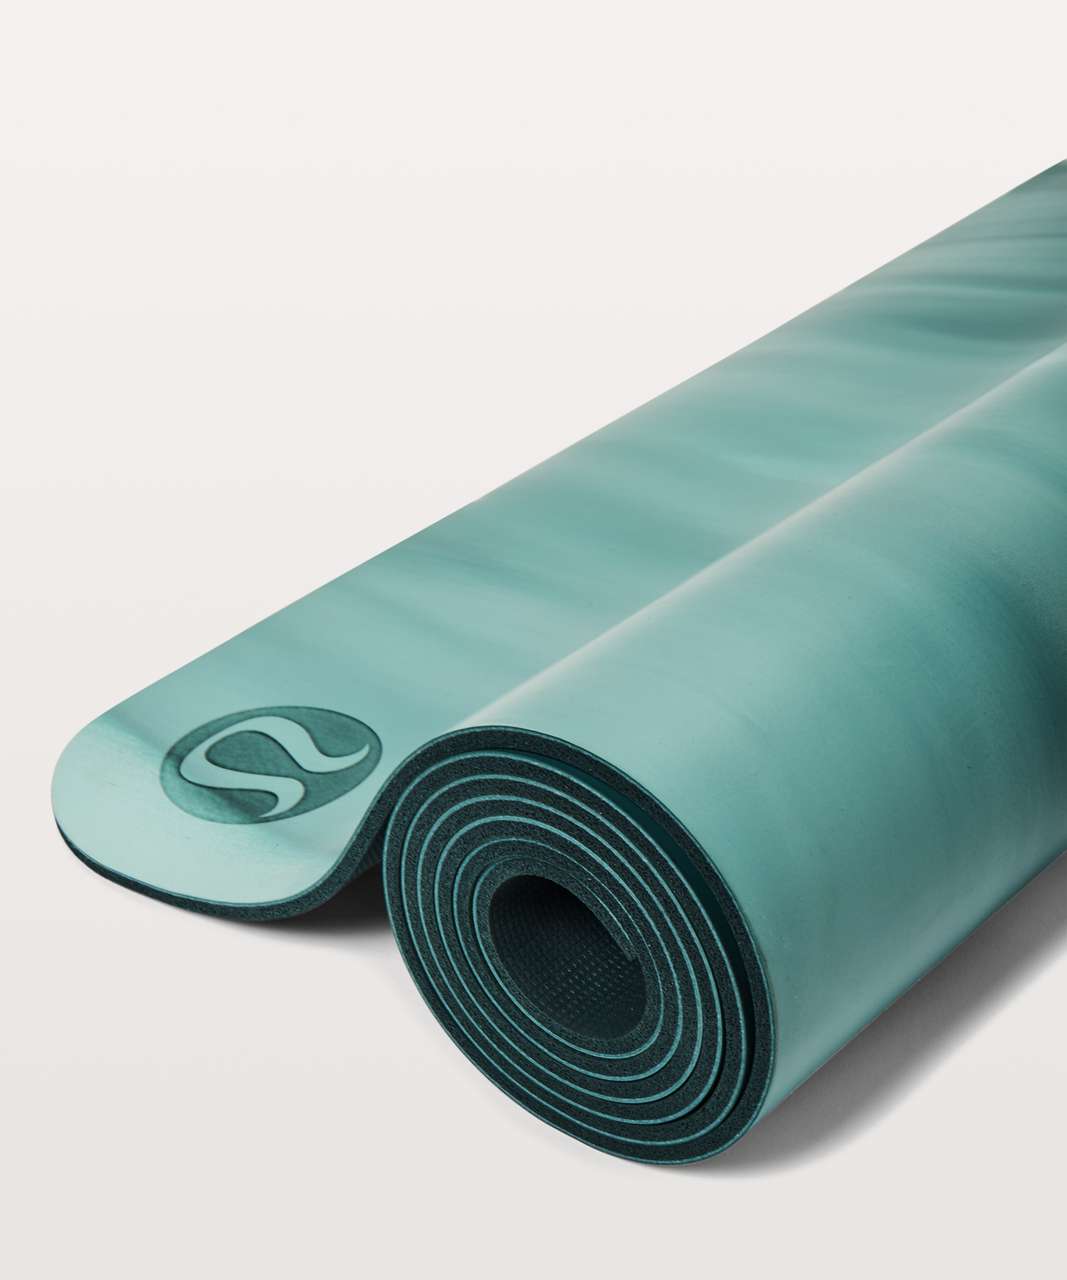 lululemon reversible mat which side